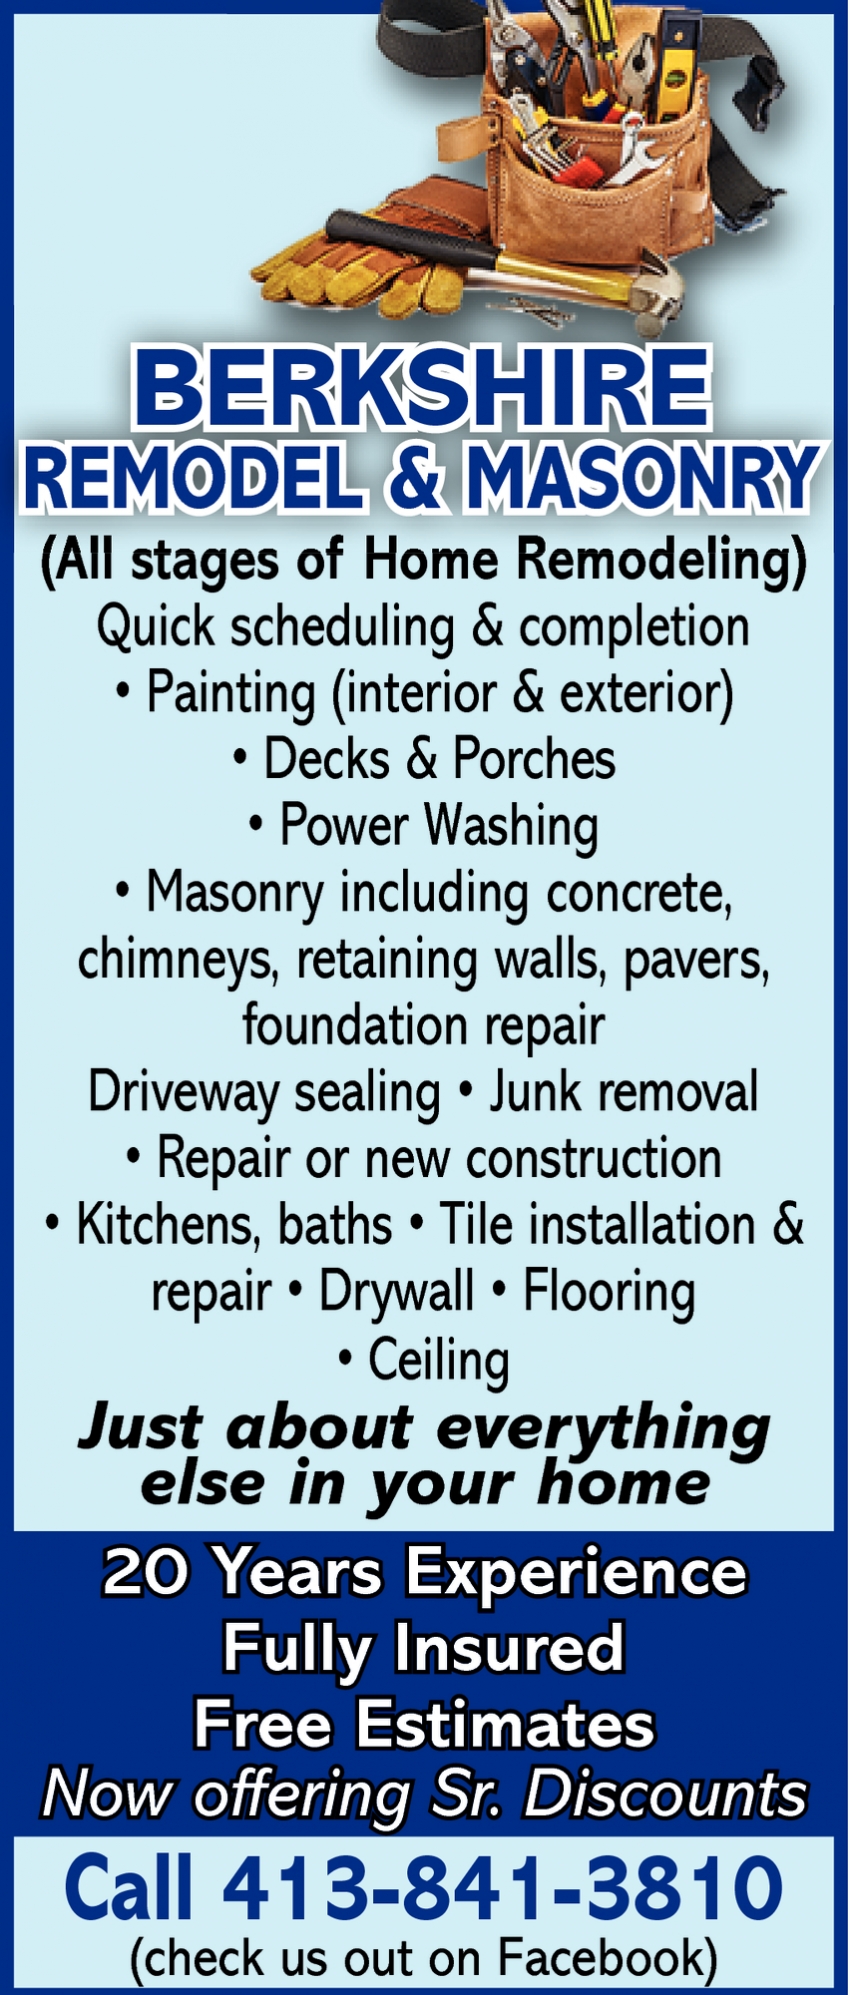 All Stages of Home Remodeling